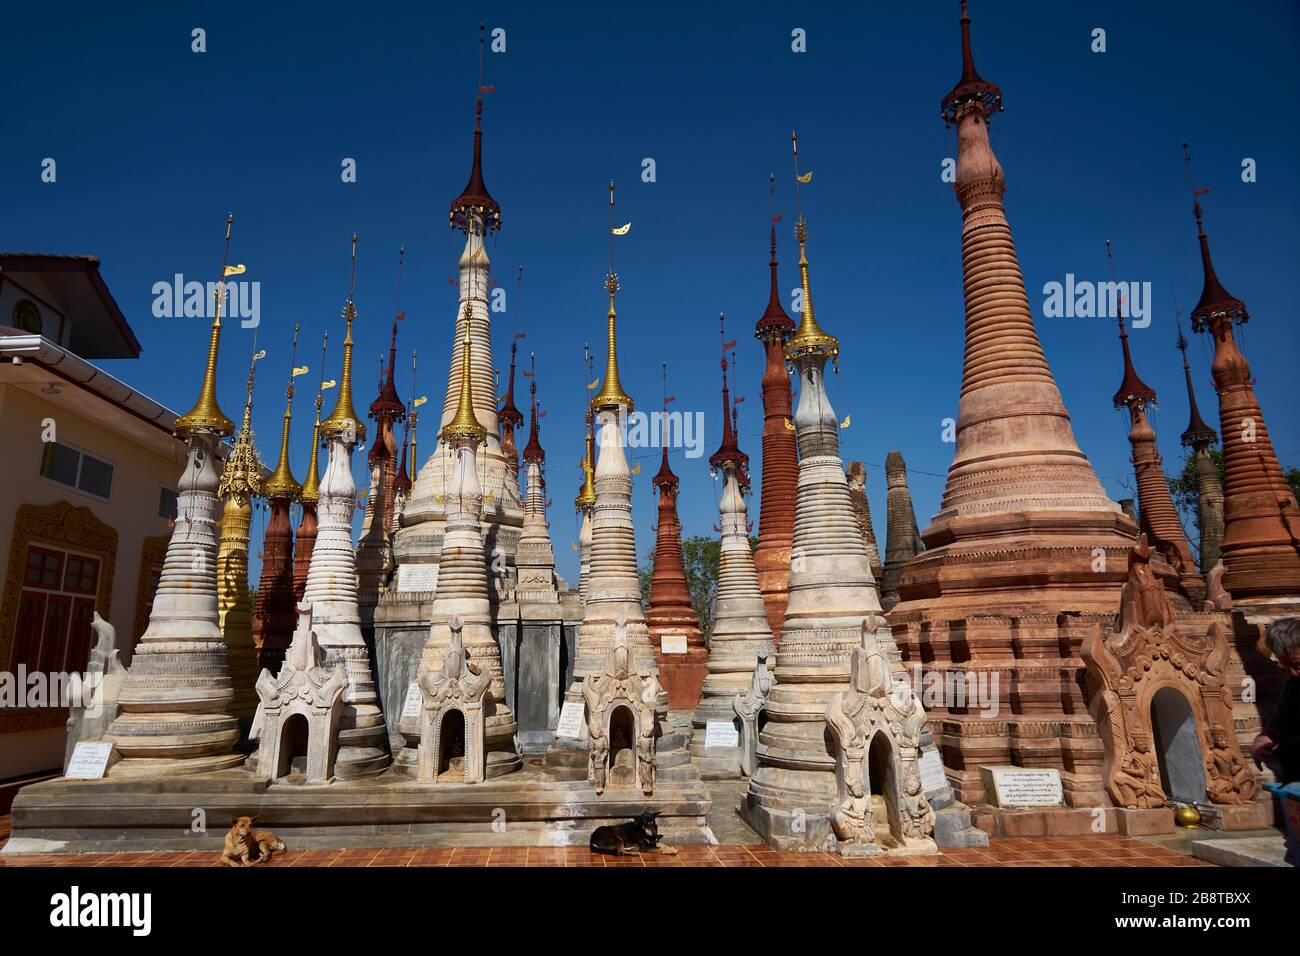 Grab-Stupas, In-Dein-Pagodenwald, Shwe Inn Thein-Pagode, Dorf Indein, Inle See, Shan-Staat, Myanmar Stockfoto